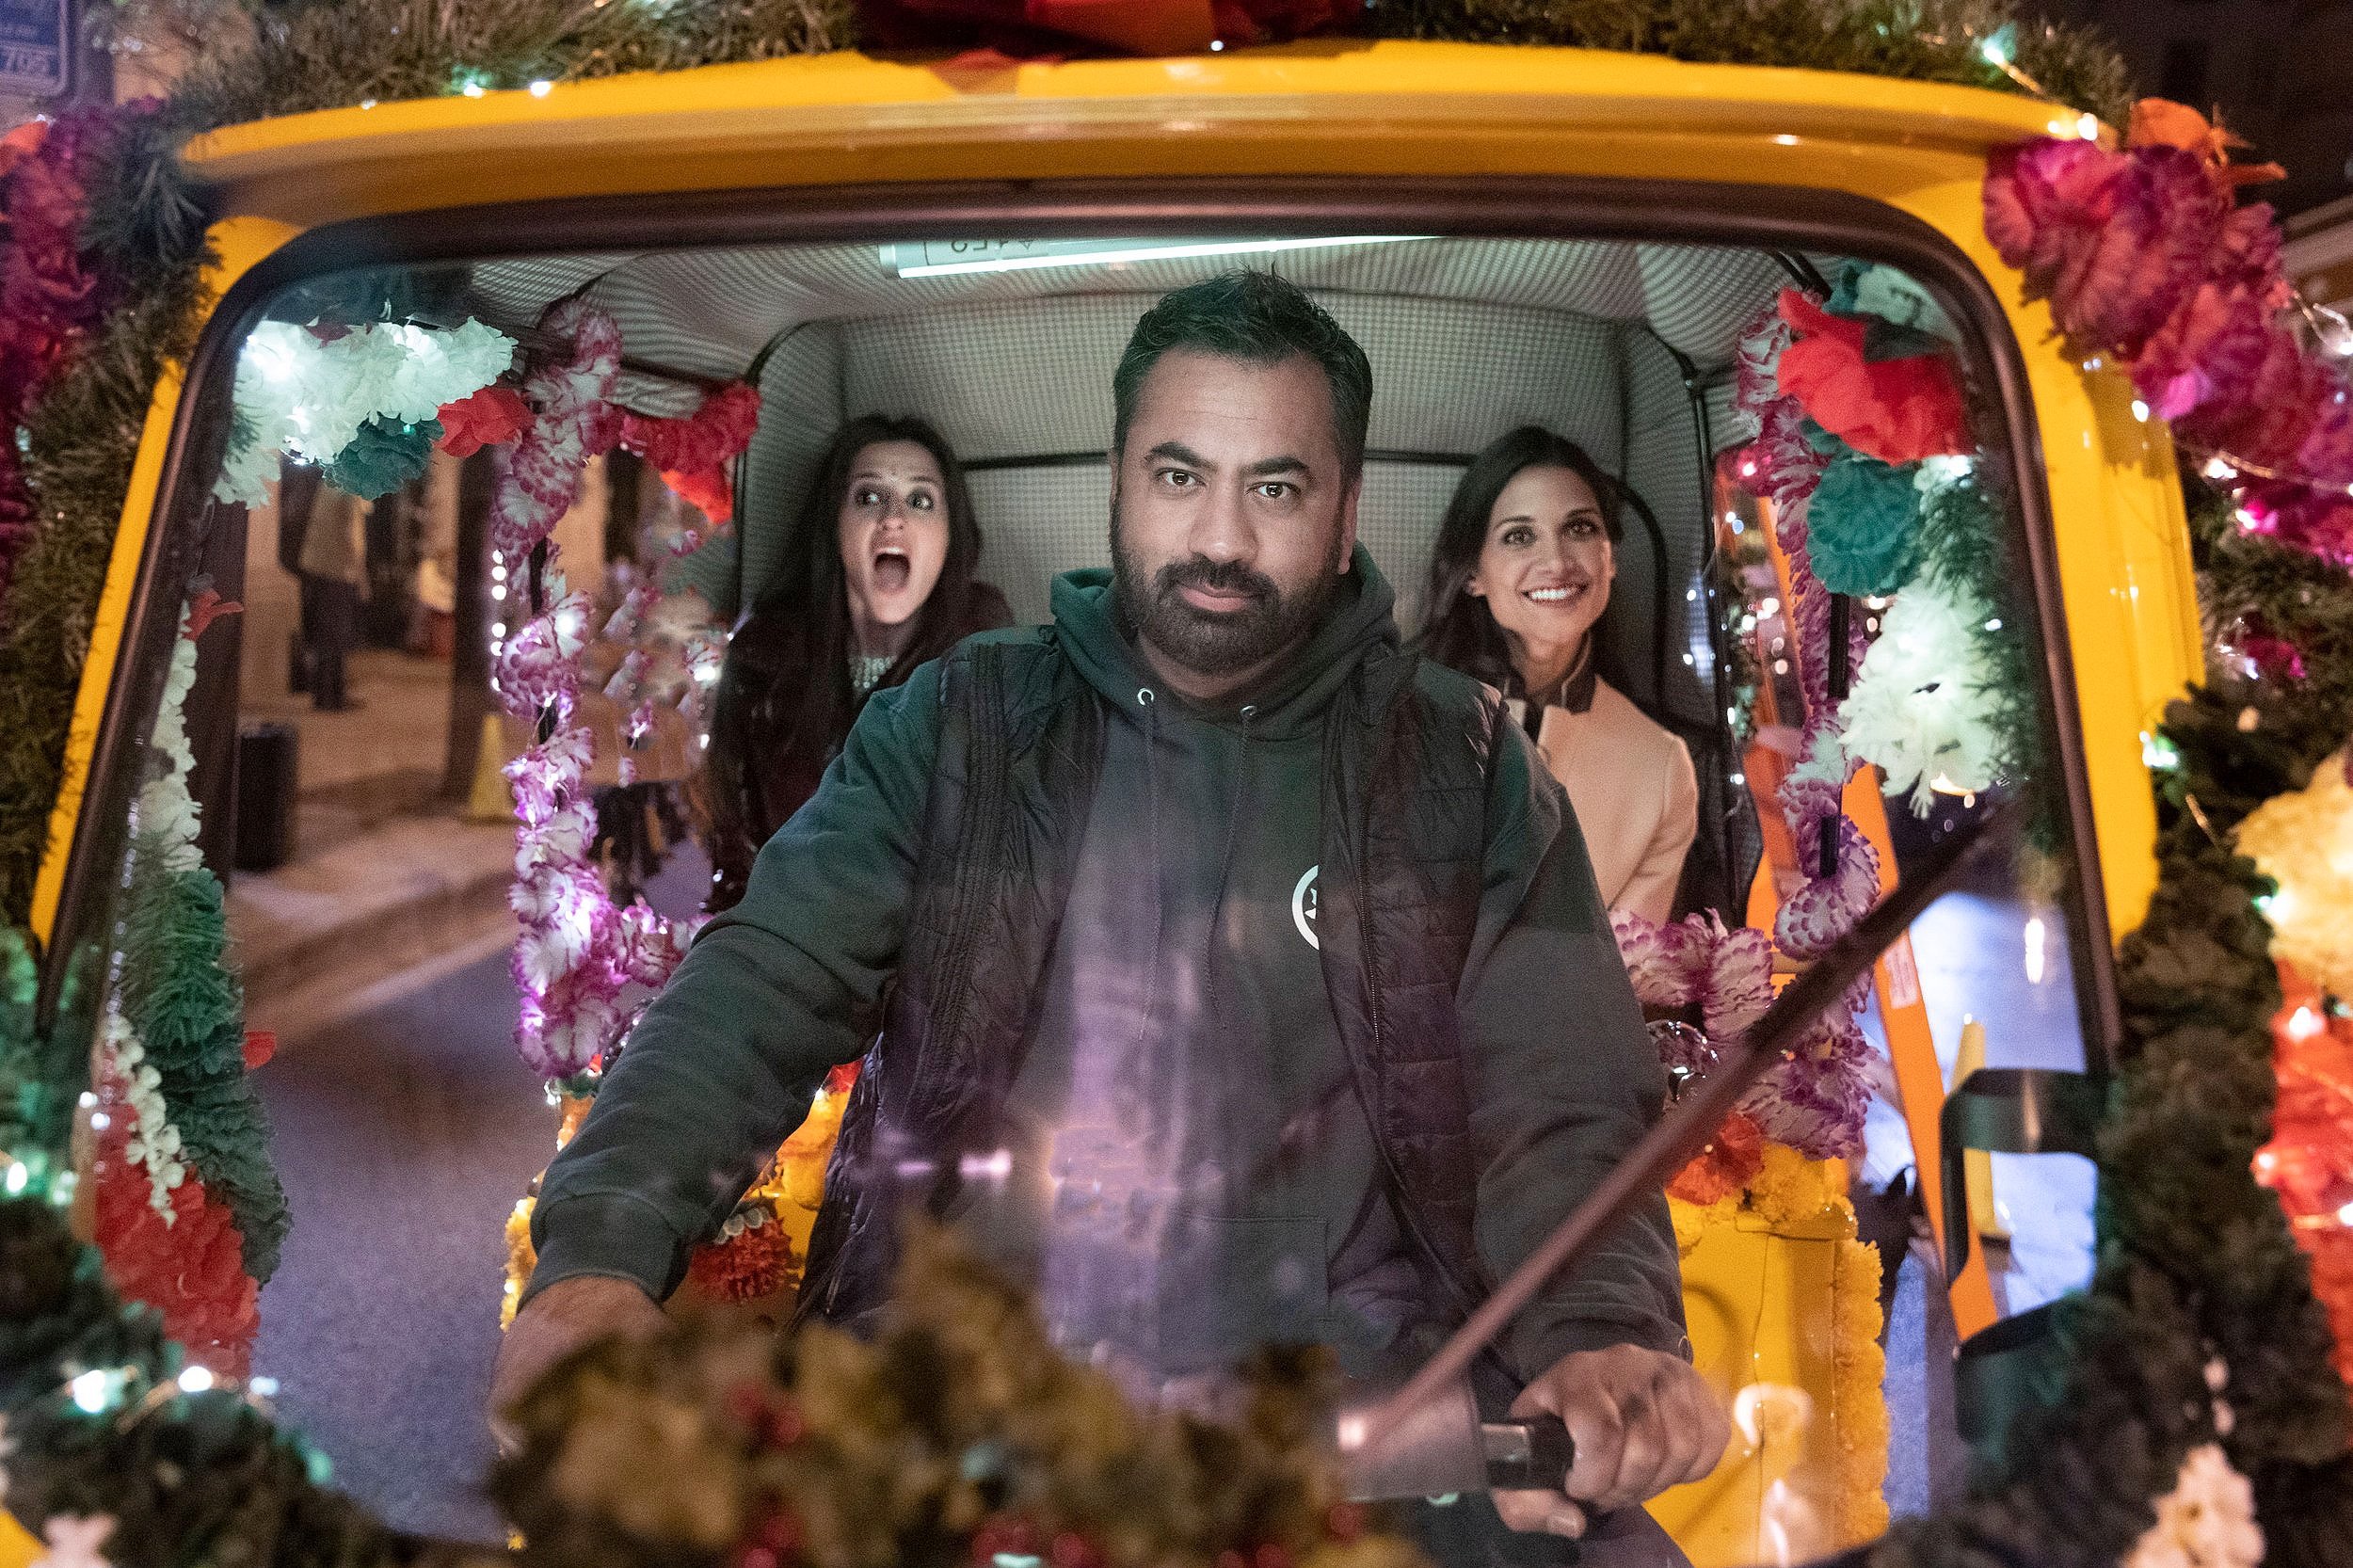 'Hot Mess Holiday' with Kal Penn for Comedy Central